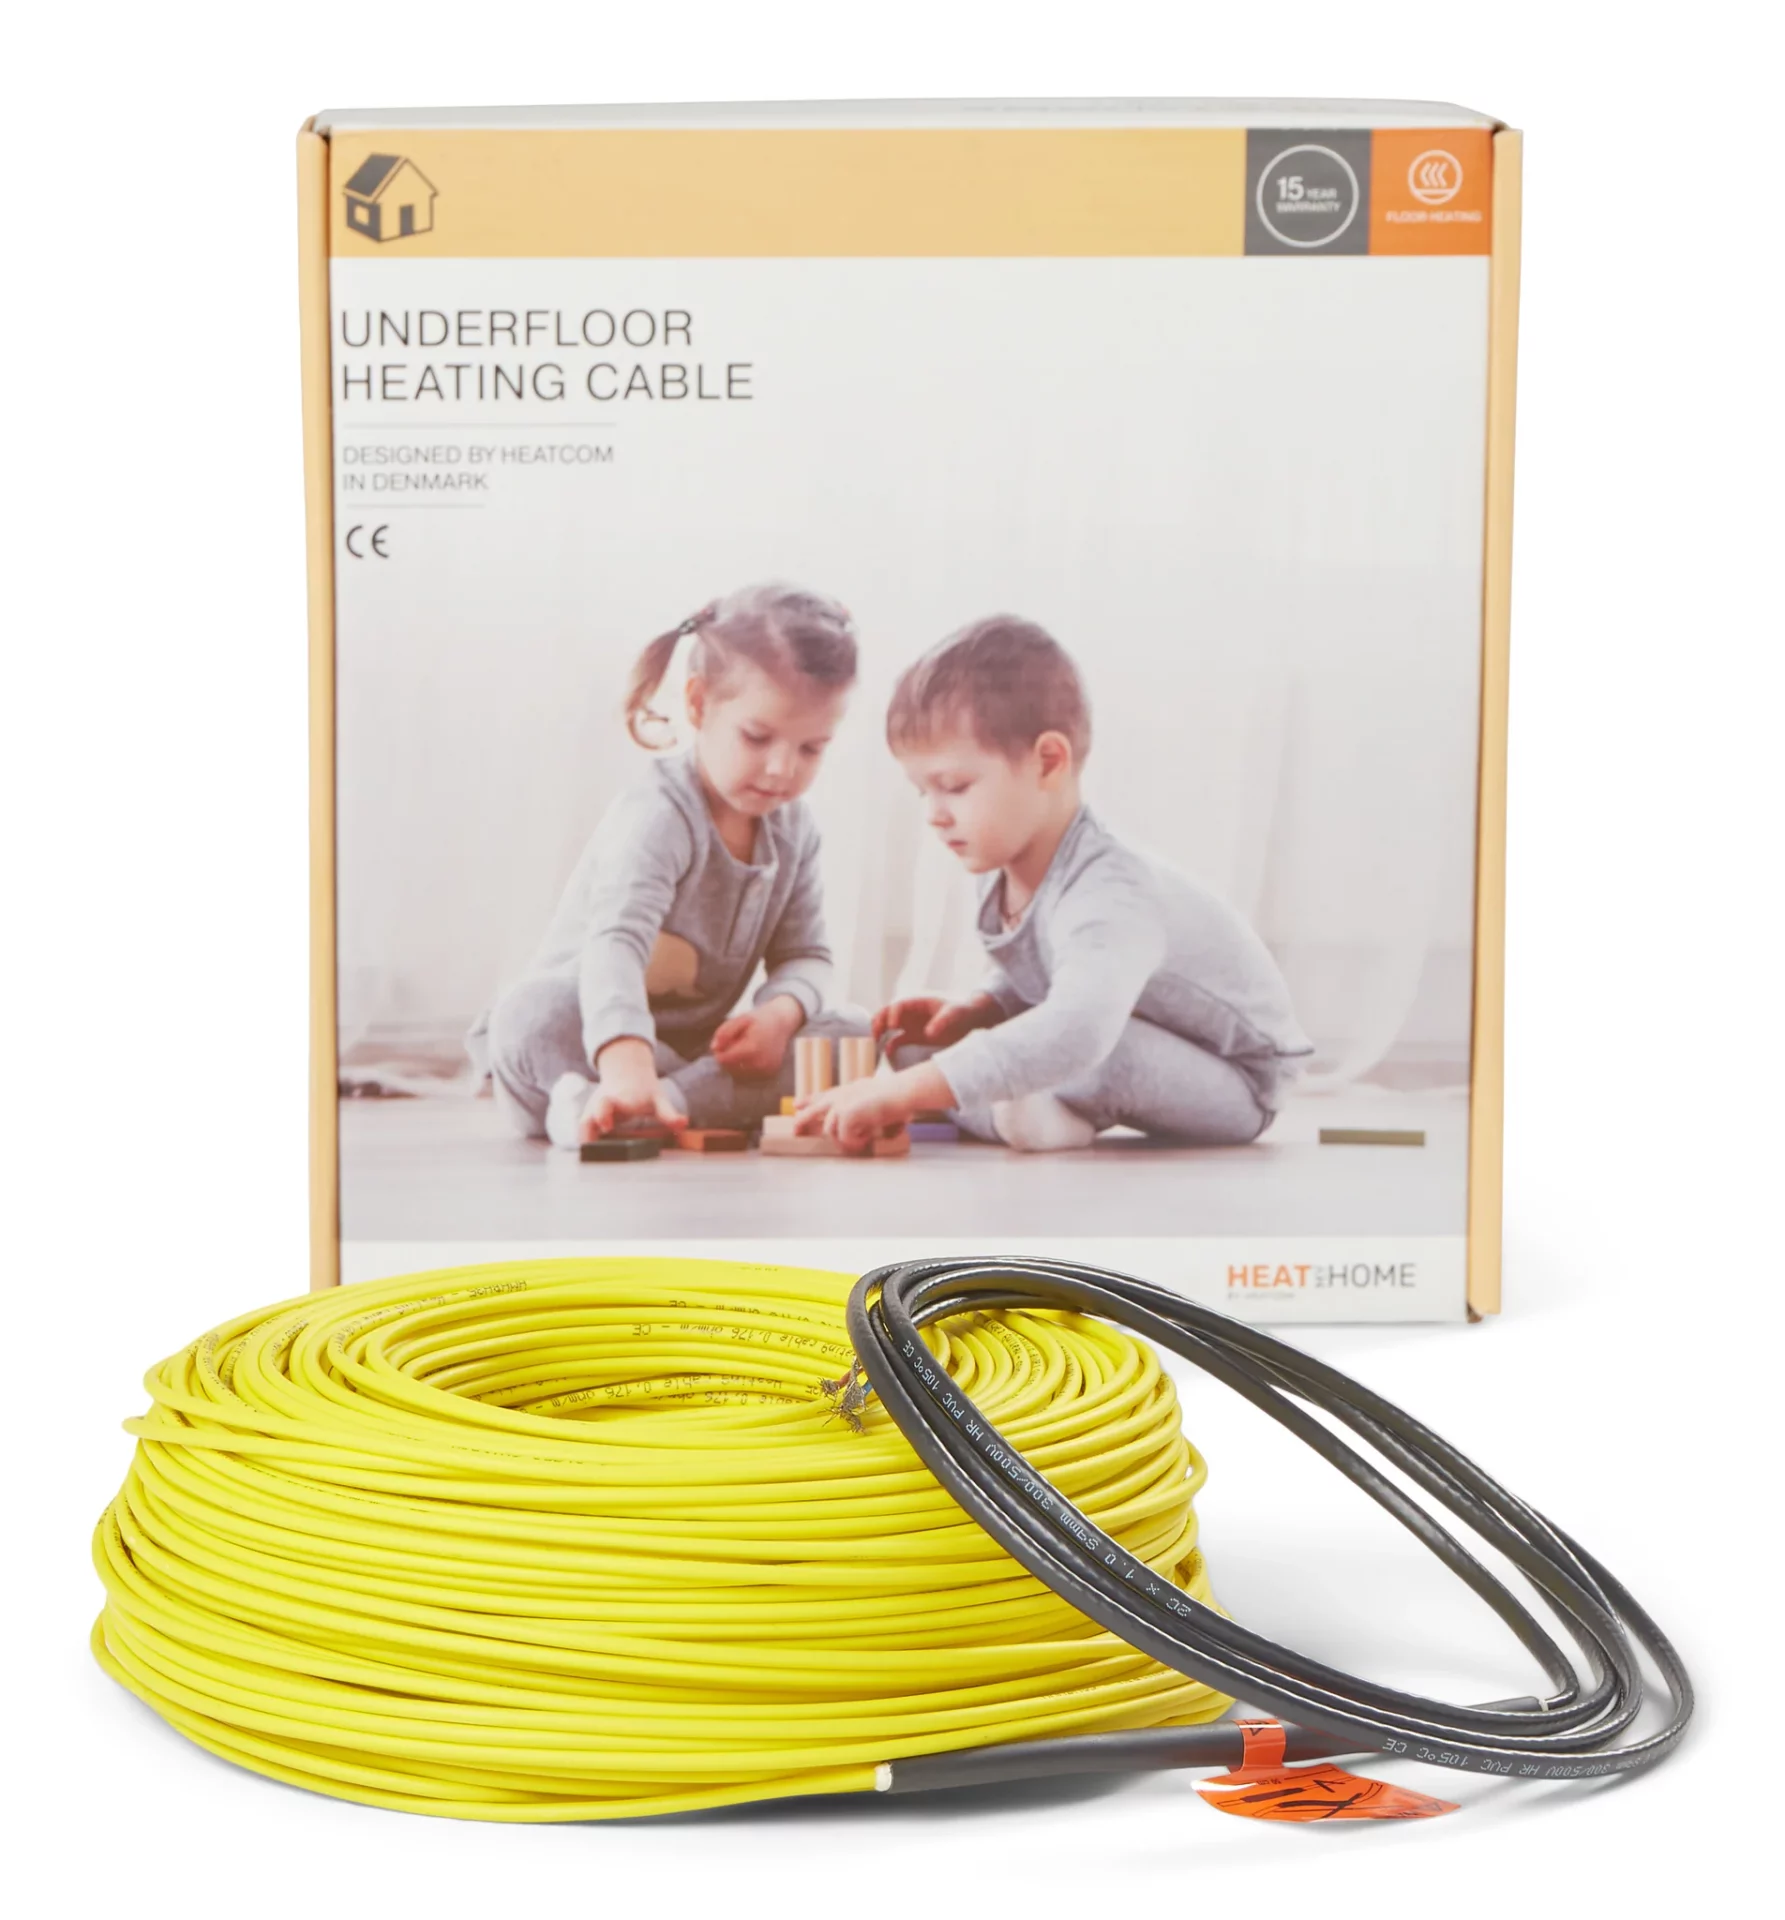 Heat My Home Undertile Heating Cable 8.4m 880W HMHCAB3.5-880W - West Midland Electrics | CCTV & Electrical Wholesaler